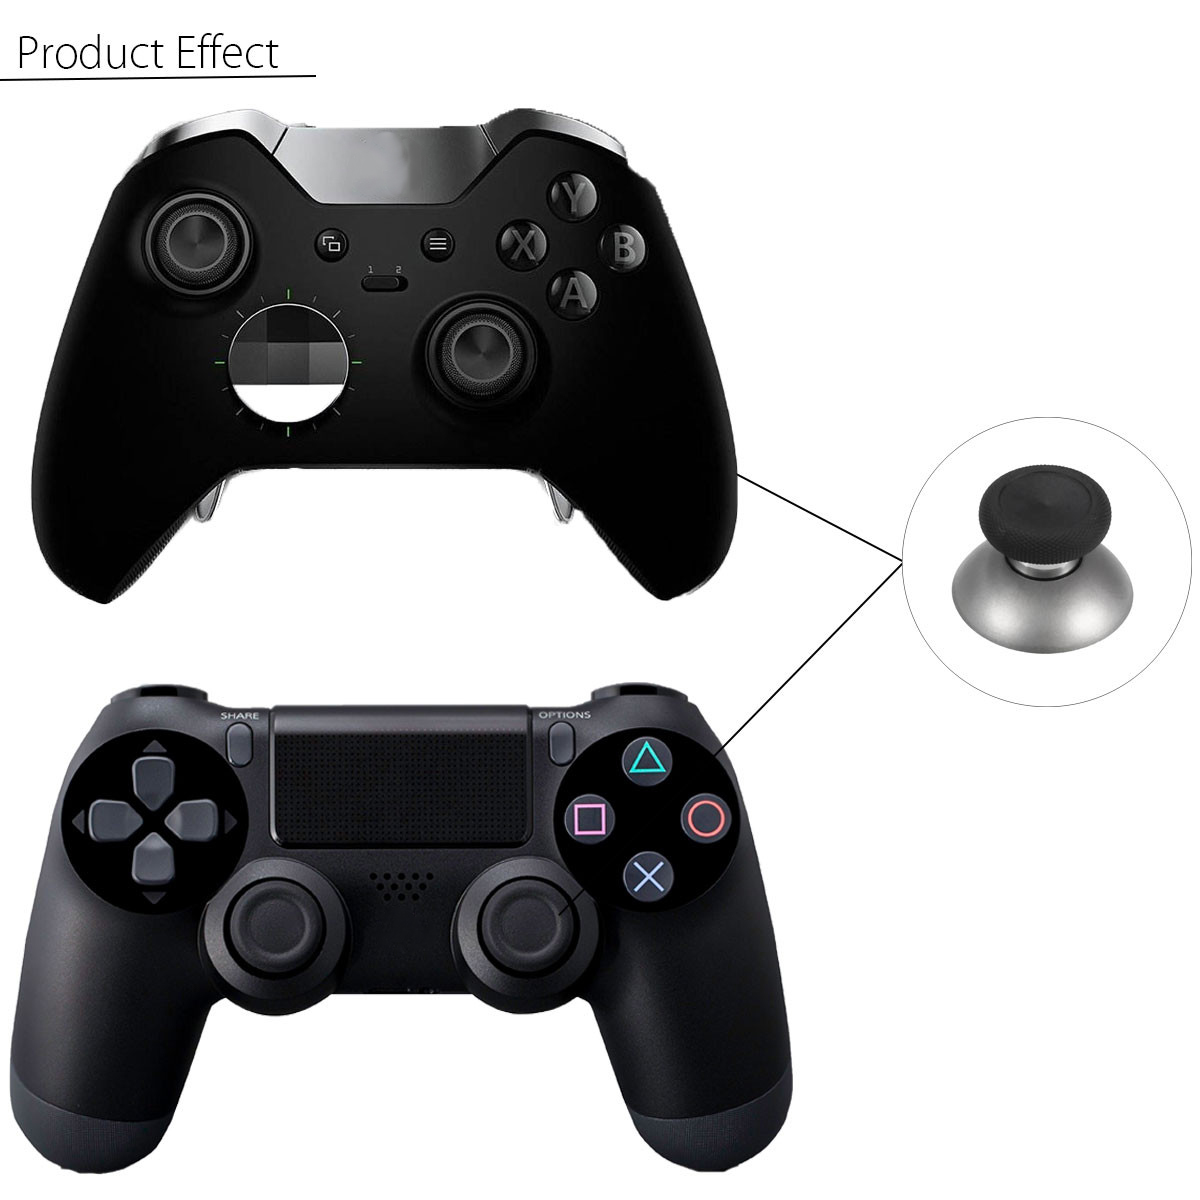 10Pcs-Metal-Controller-Thumbsticks-Buttons-Grip-Mod-Replacement-Kit-For-Xbox-one-Elite-For-Sony-Play-1414635